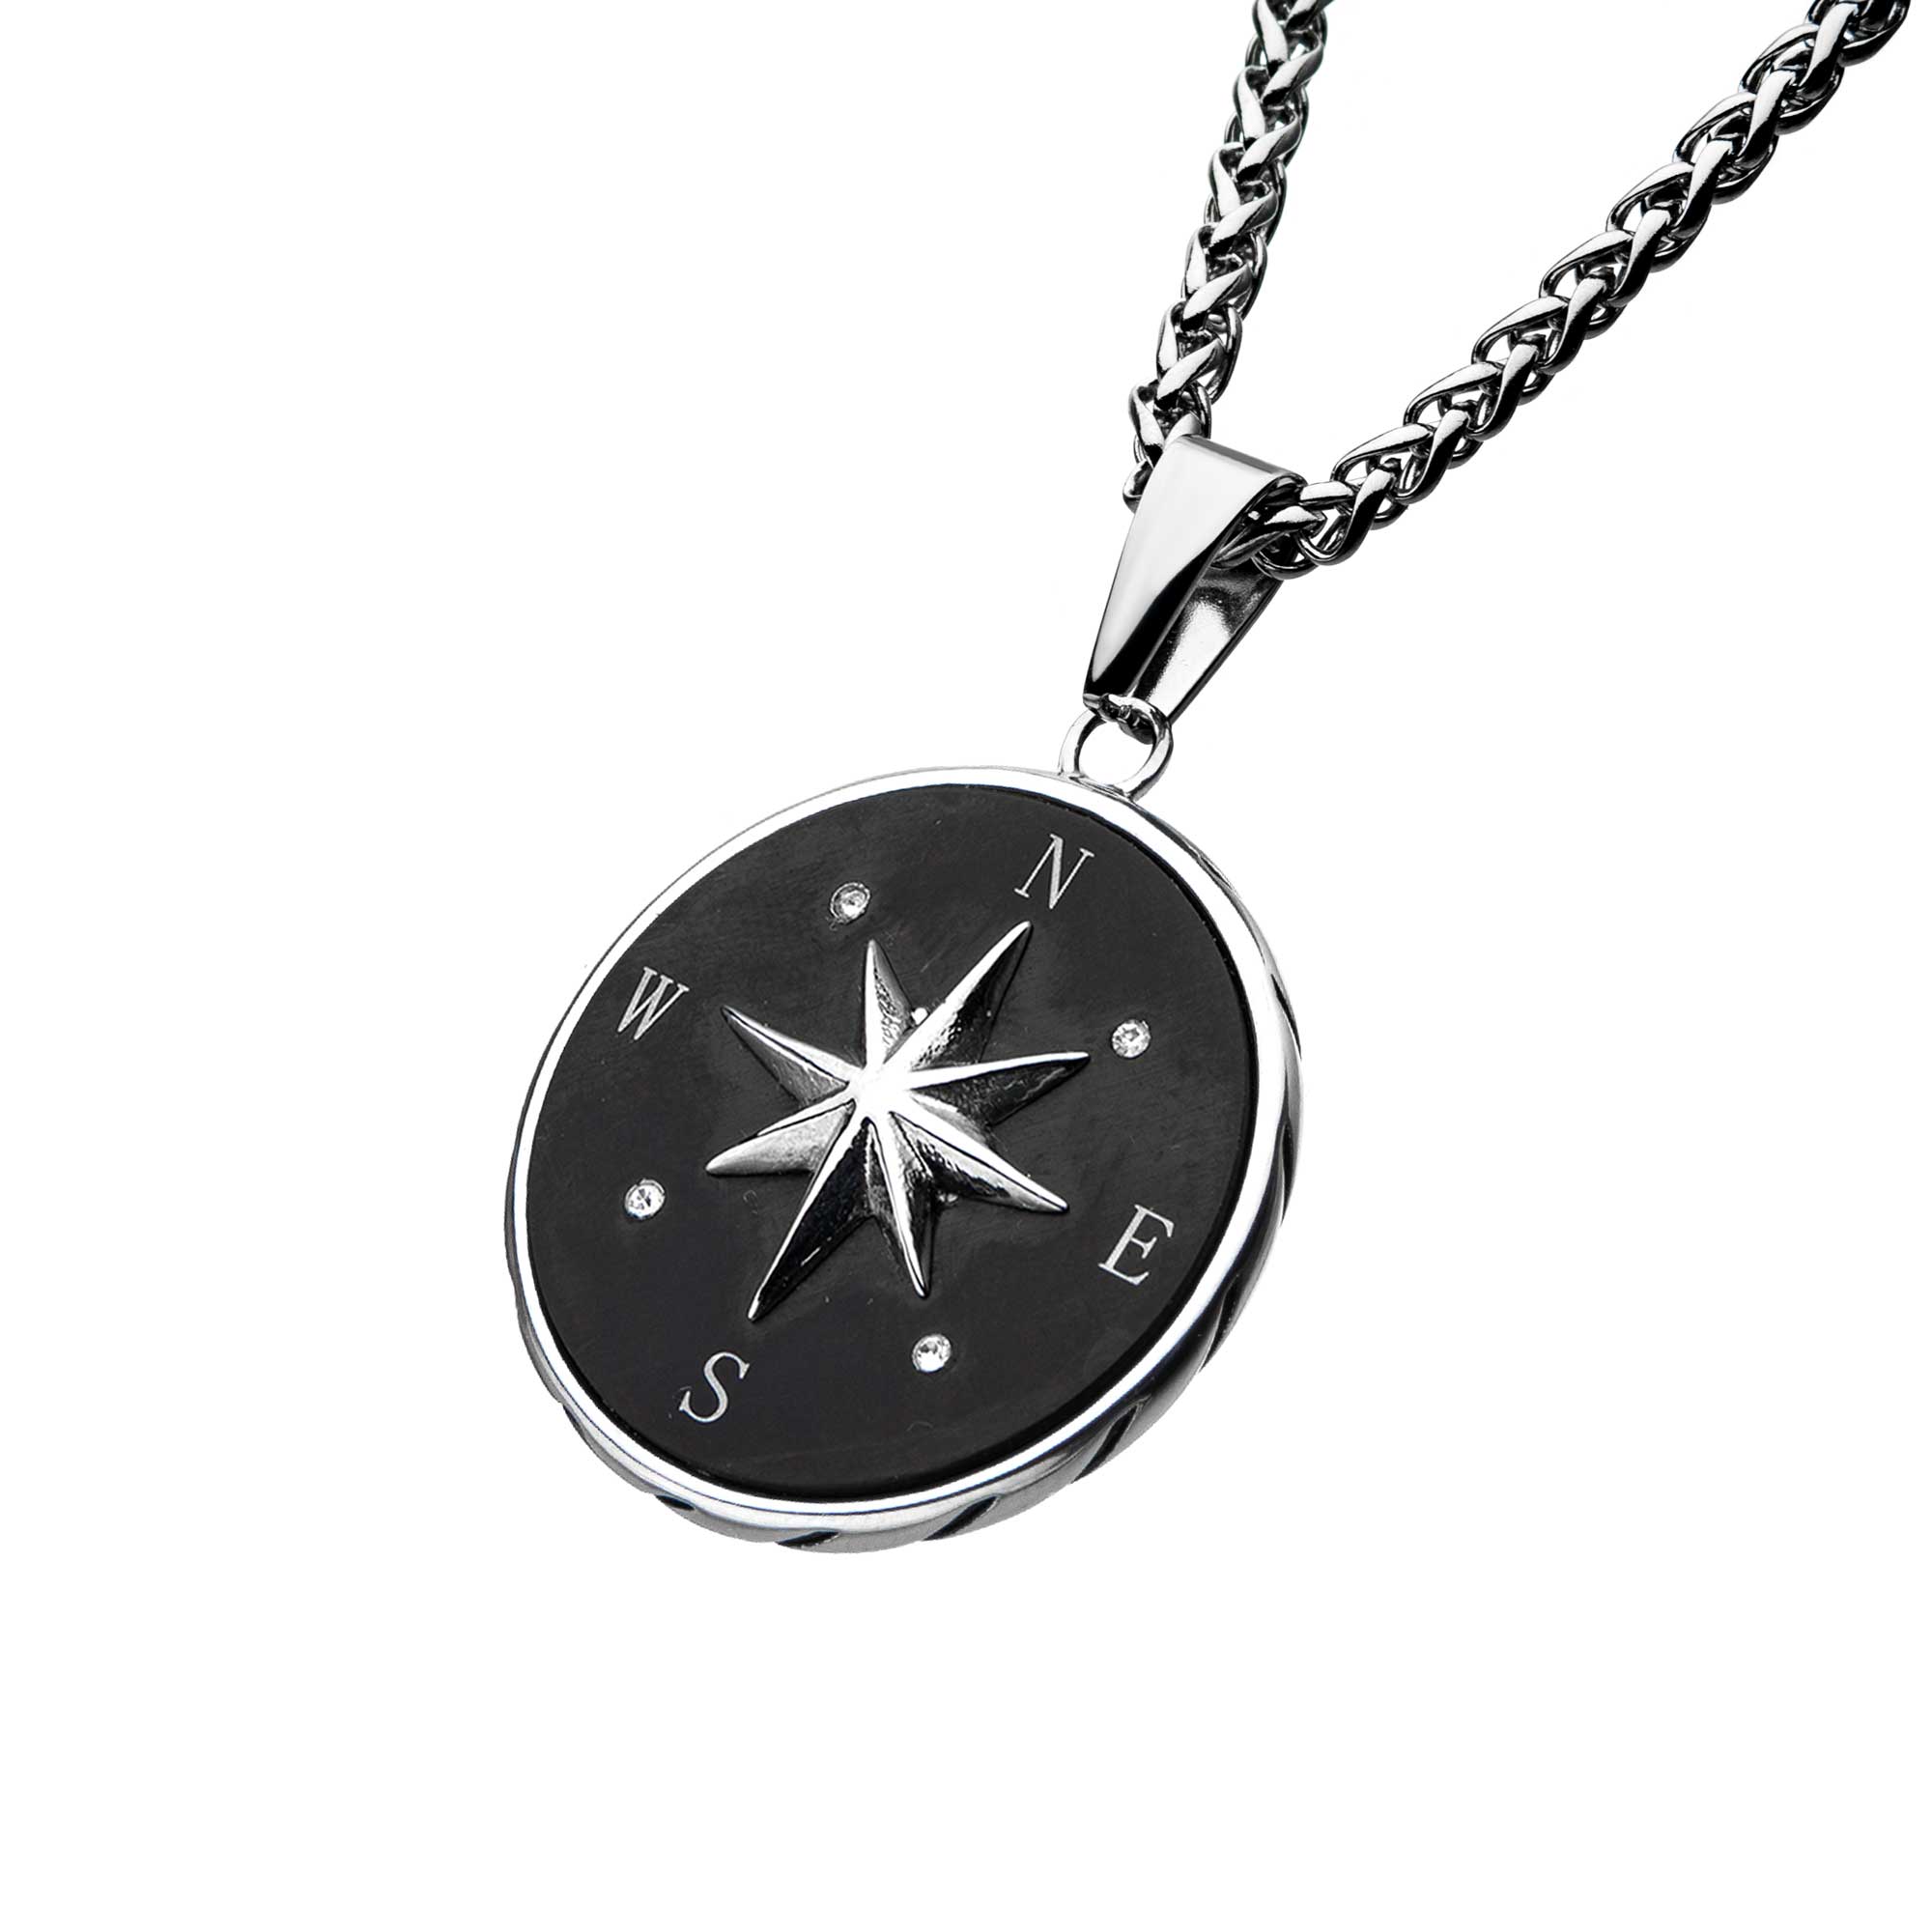 Stainless Steel and Black Plated Compass Pendant with Chain Image 2 Mitchell's Jewelry Norman, OK